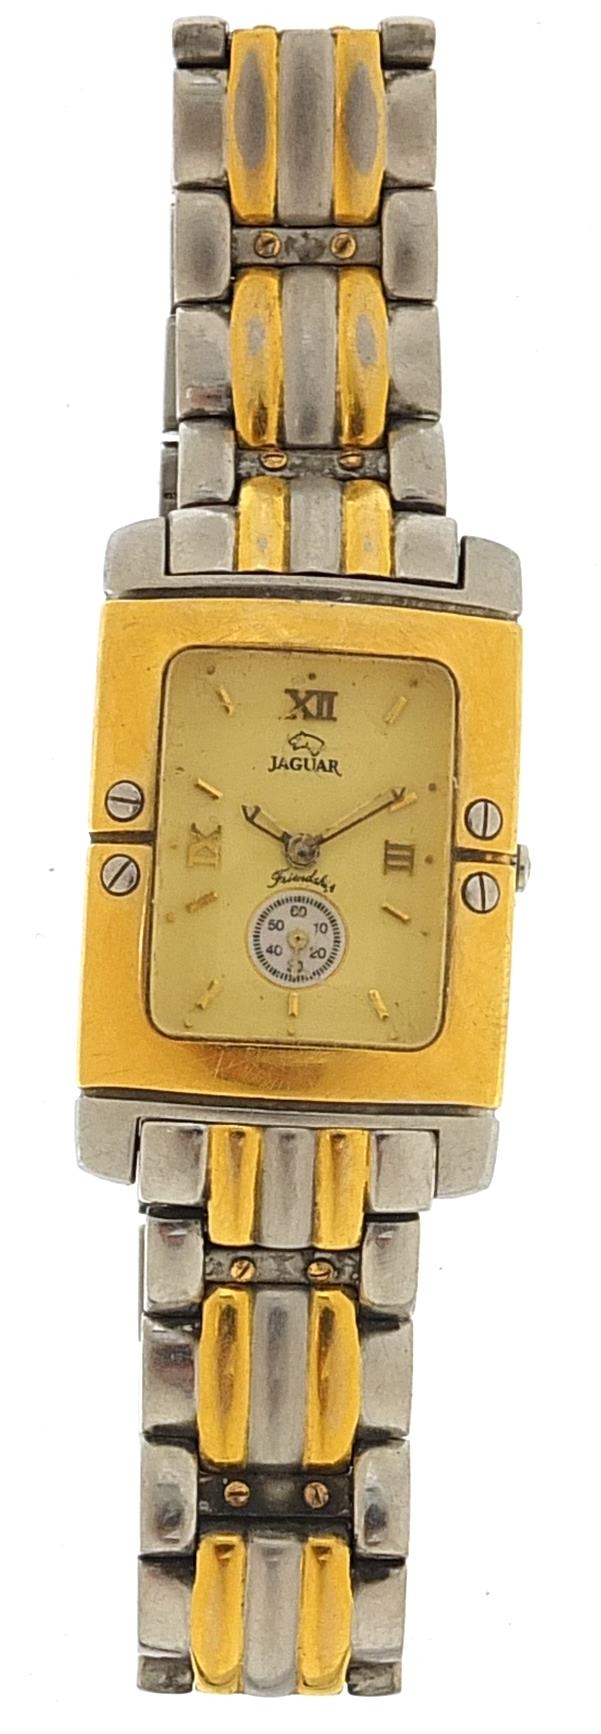 Jaguar, ladies wristwatch with subsidiary dial, the case numbered J-286, 20mm wide - Image 2 of 4